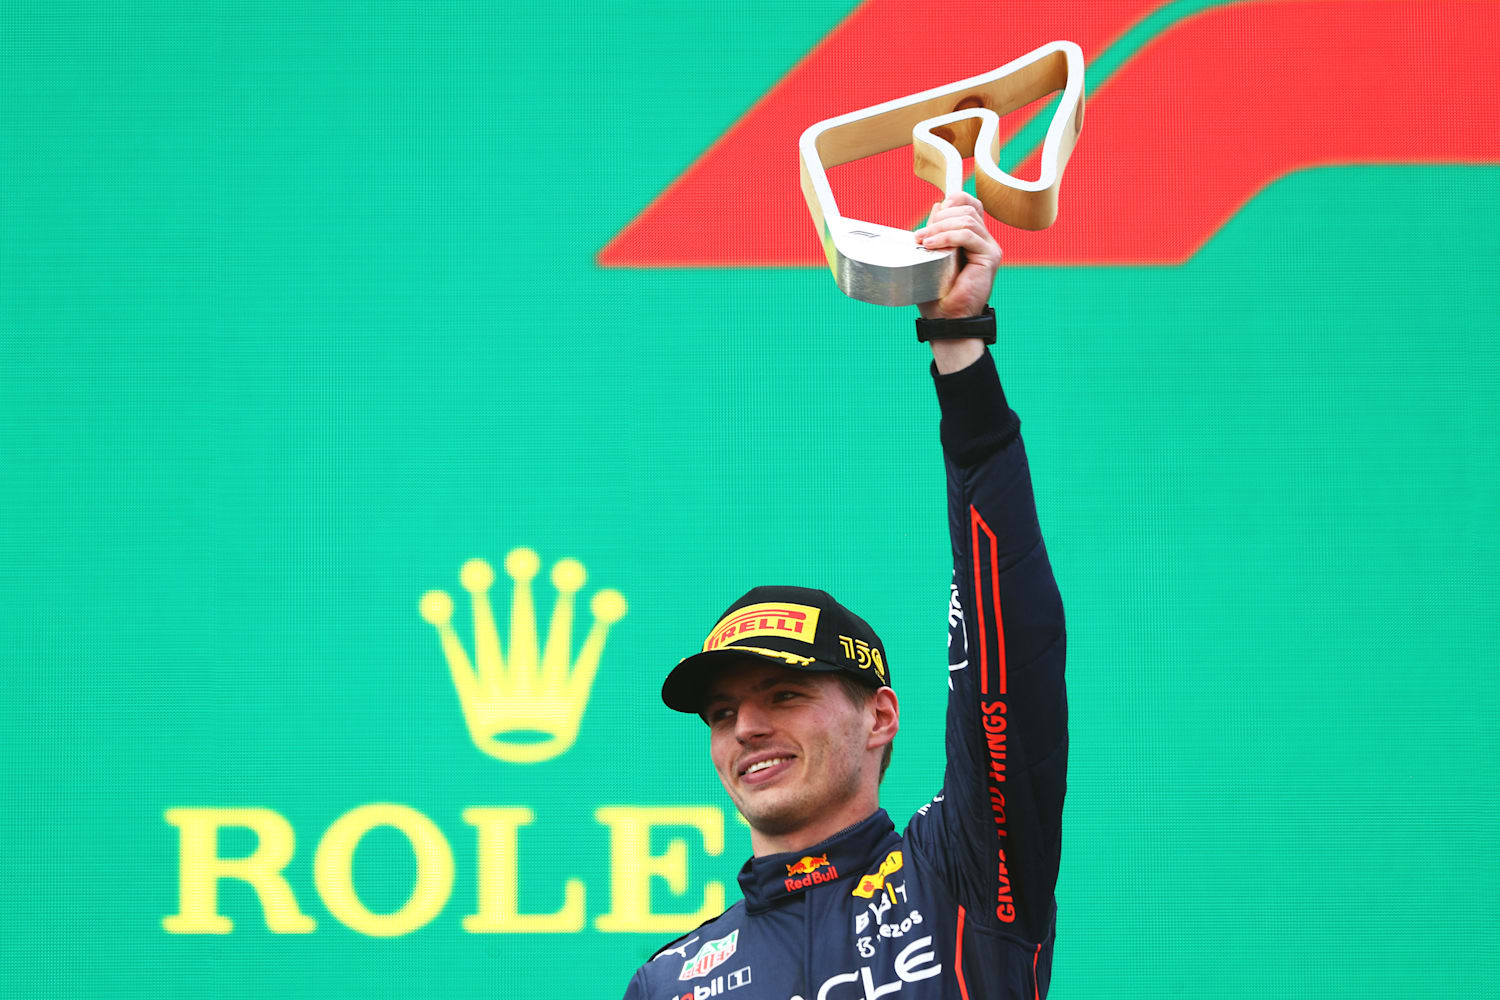 Max Verstappen thrills home fans with another pole position